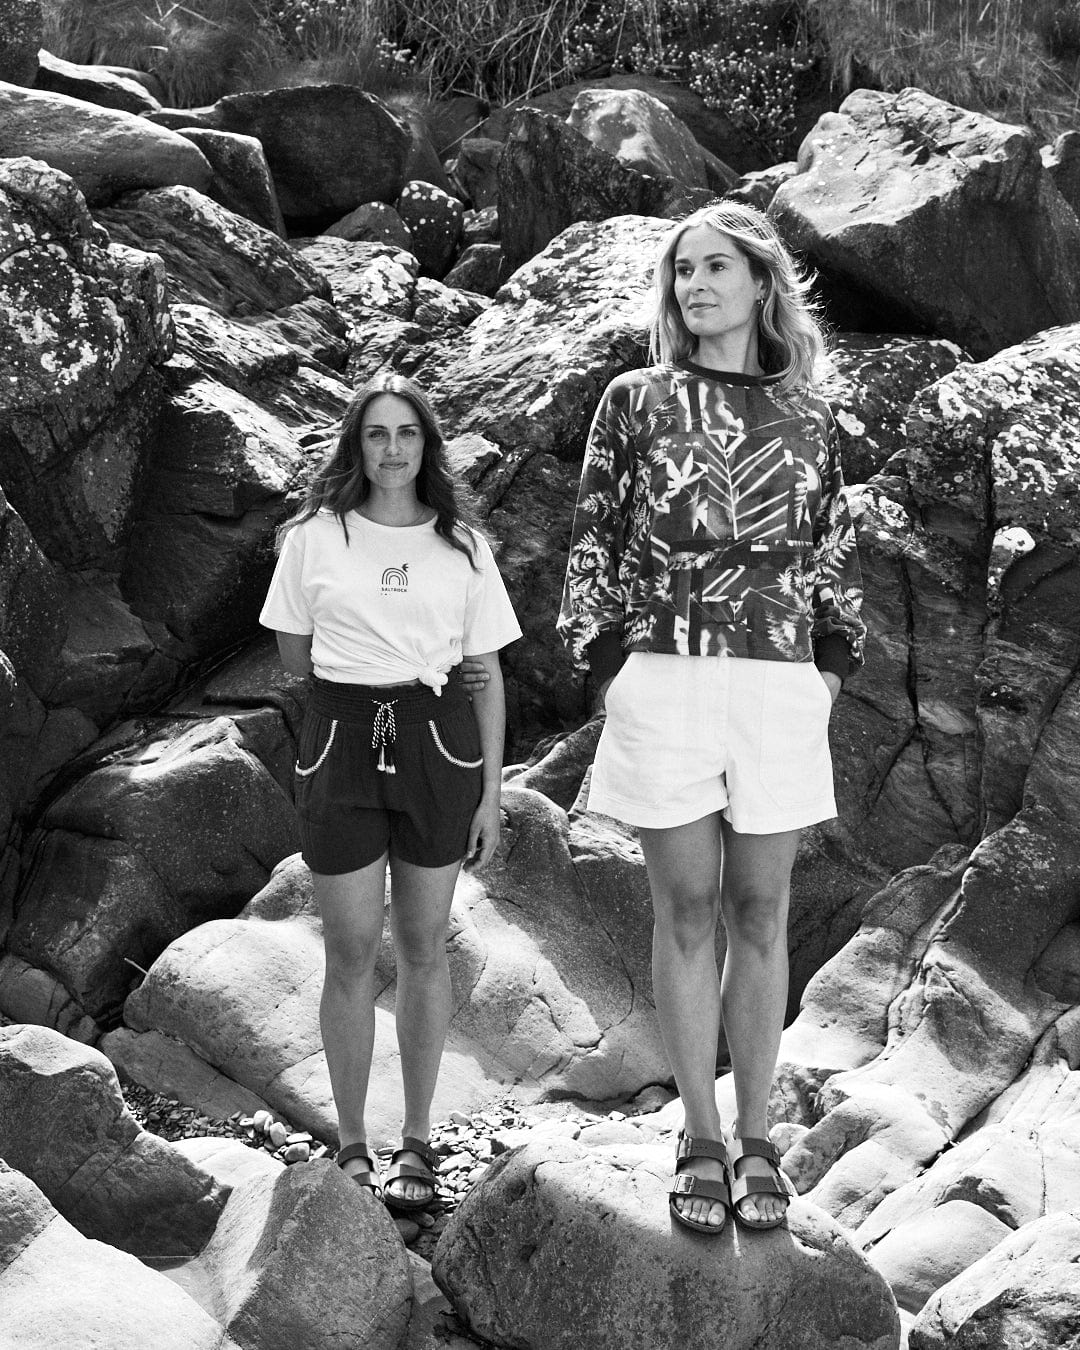 Two women stand among large rocks. One is wearing a Saltrock Cyanotype - Womens Recycled Boxy Sweat - Blue and shorts, while the other sports a patterned long-sleeve shirt featuring an abstract forest print and shorts. The background consists of rocks and some vegetation.